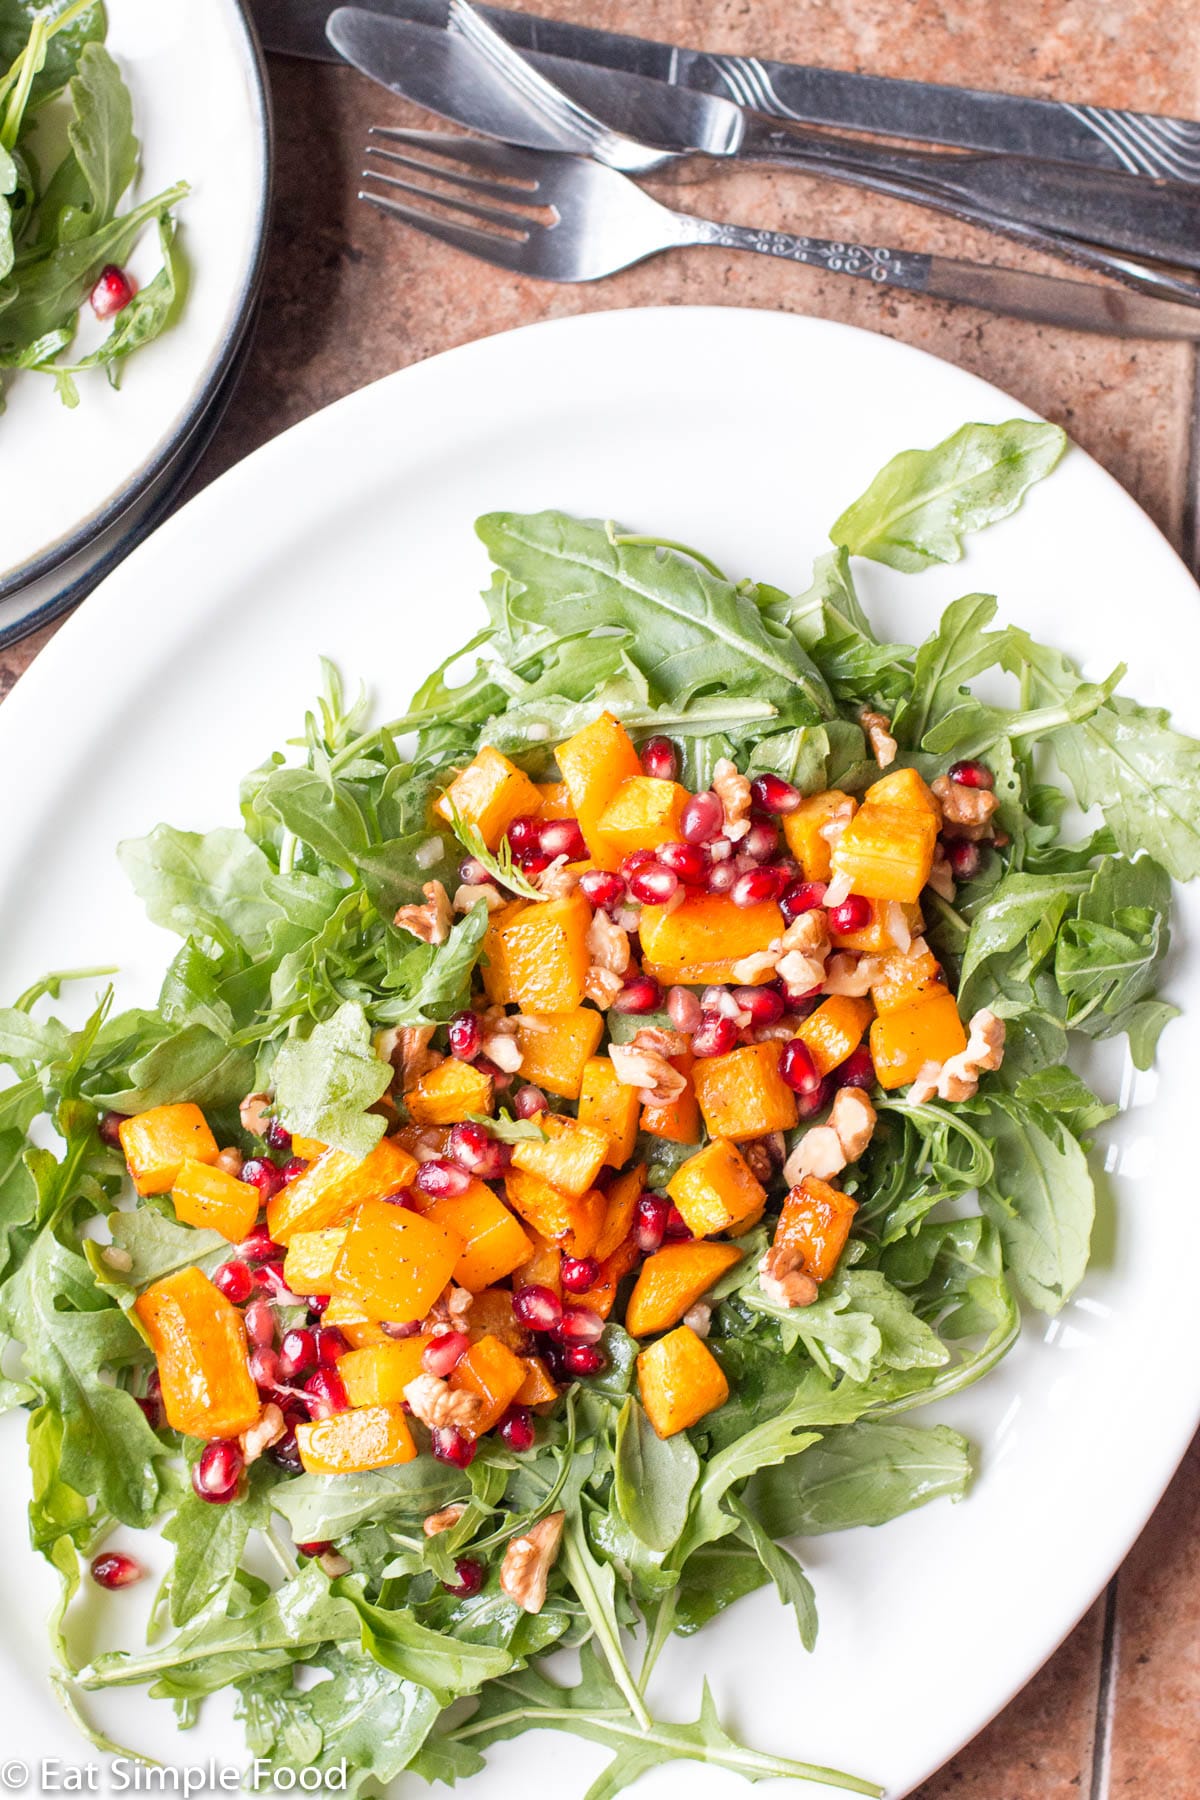 Roasted butternut squash on top of arugula on a white plate. Garnished with chopped walnuts and red pomegranate kernels. Top view.